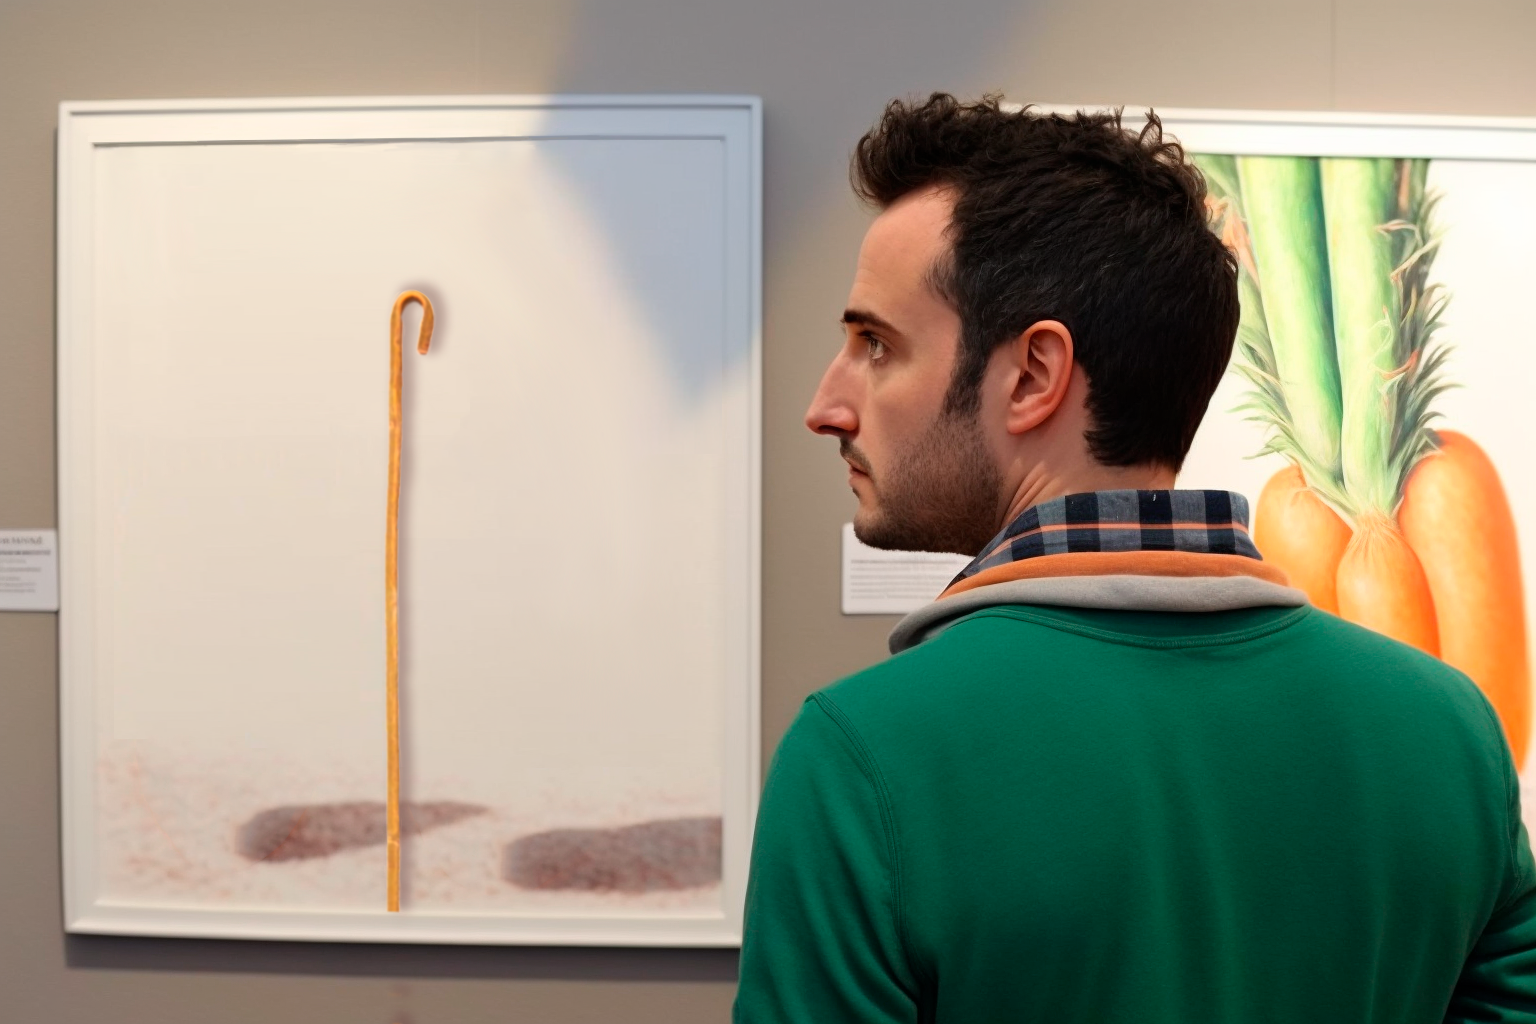 A man looks at two paintings on a wall. One painting is of a cane stick, the other is of a carrot.